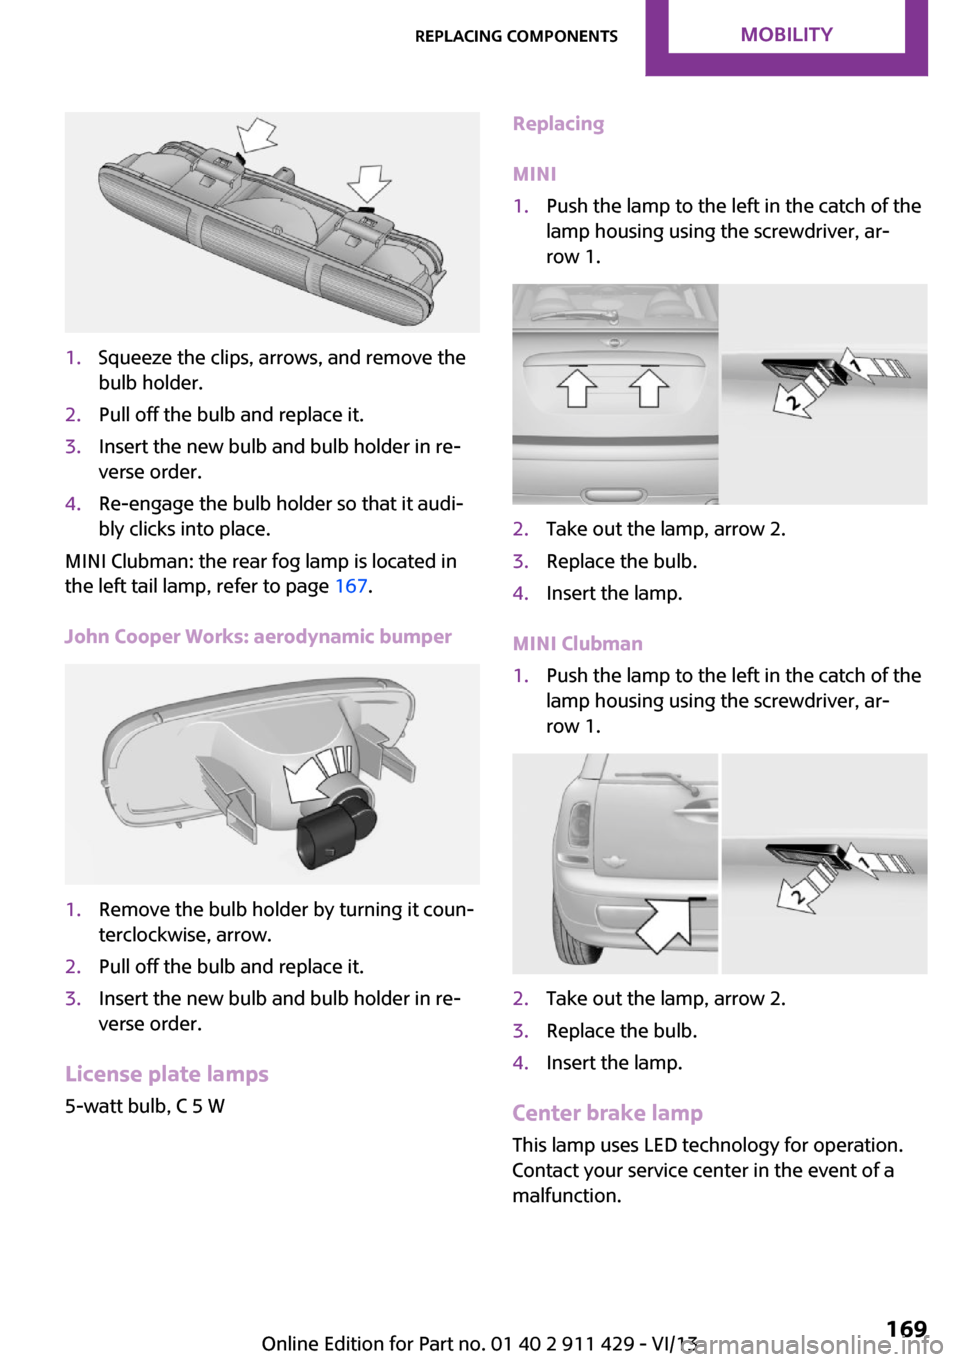 MINI Clubman 2014  Owners Manual 1.Squeeze the clips, arrows, and remove the
bulb holder.2.Pull off the bulb and replace it.3.Insert the new bulb and bulb holder in re‐
verse order.4.Re-engage the bulb holder so that it audi‐
bly